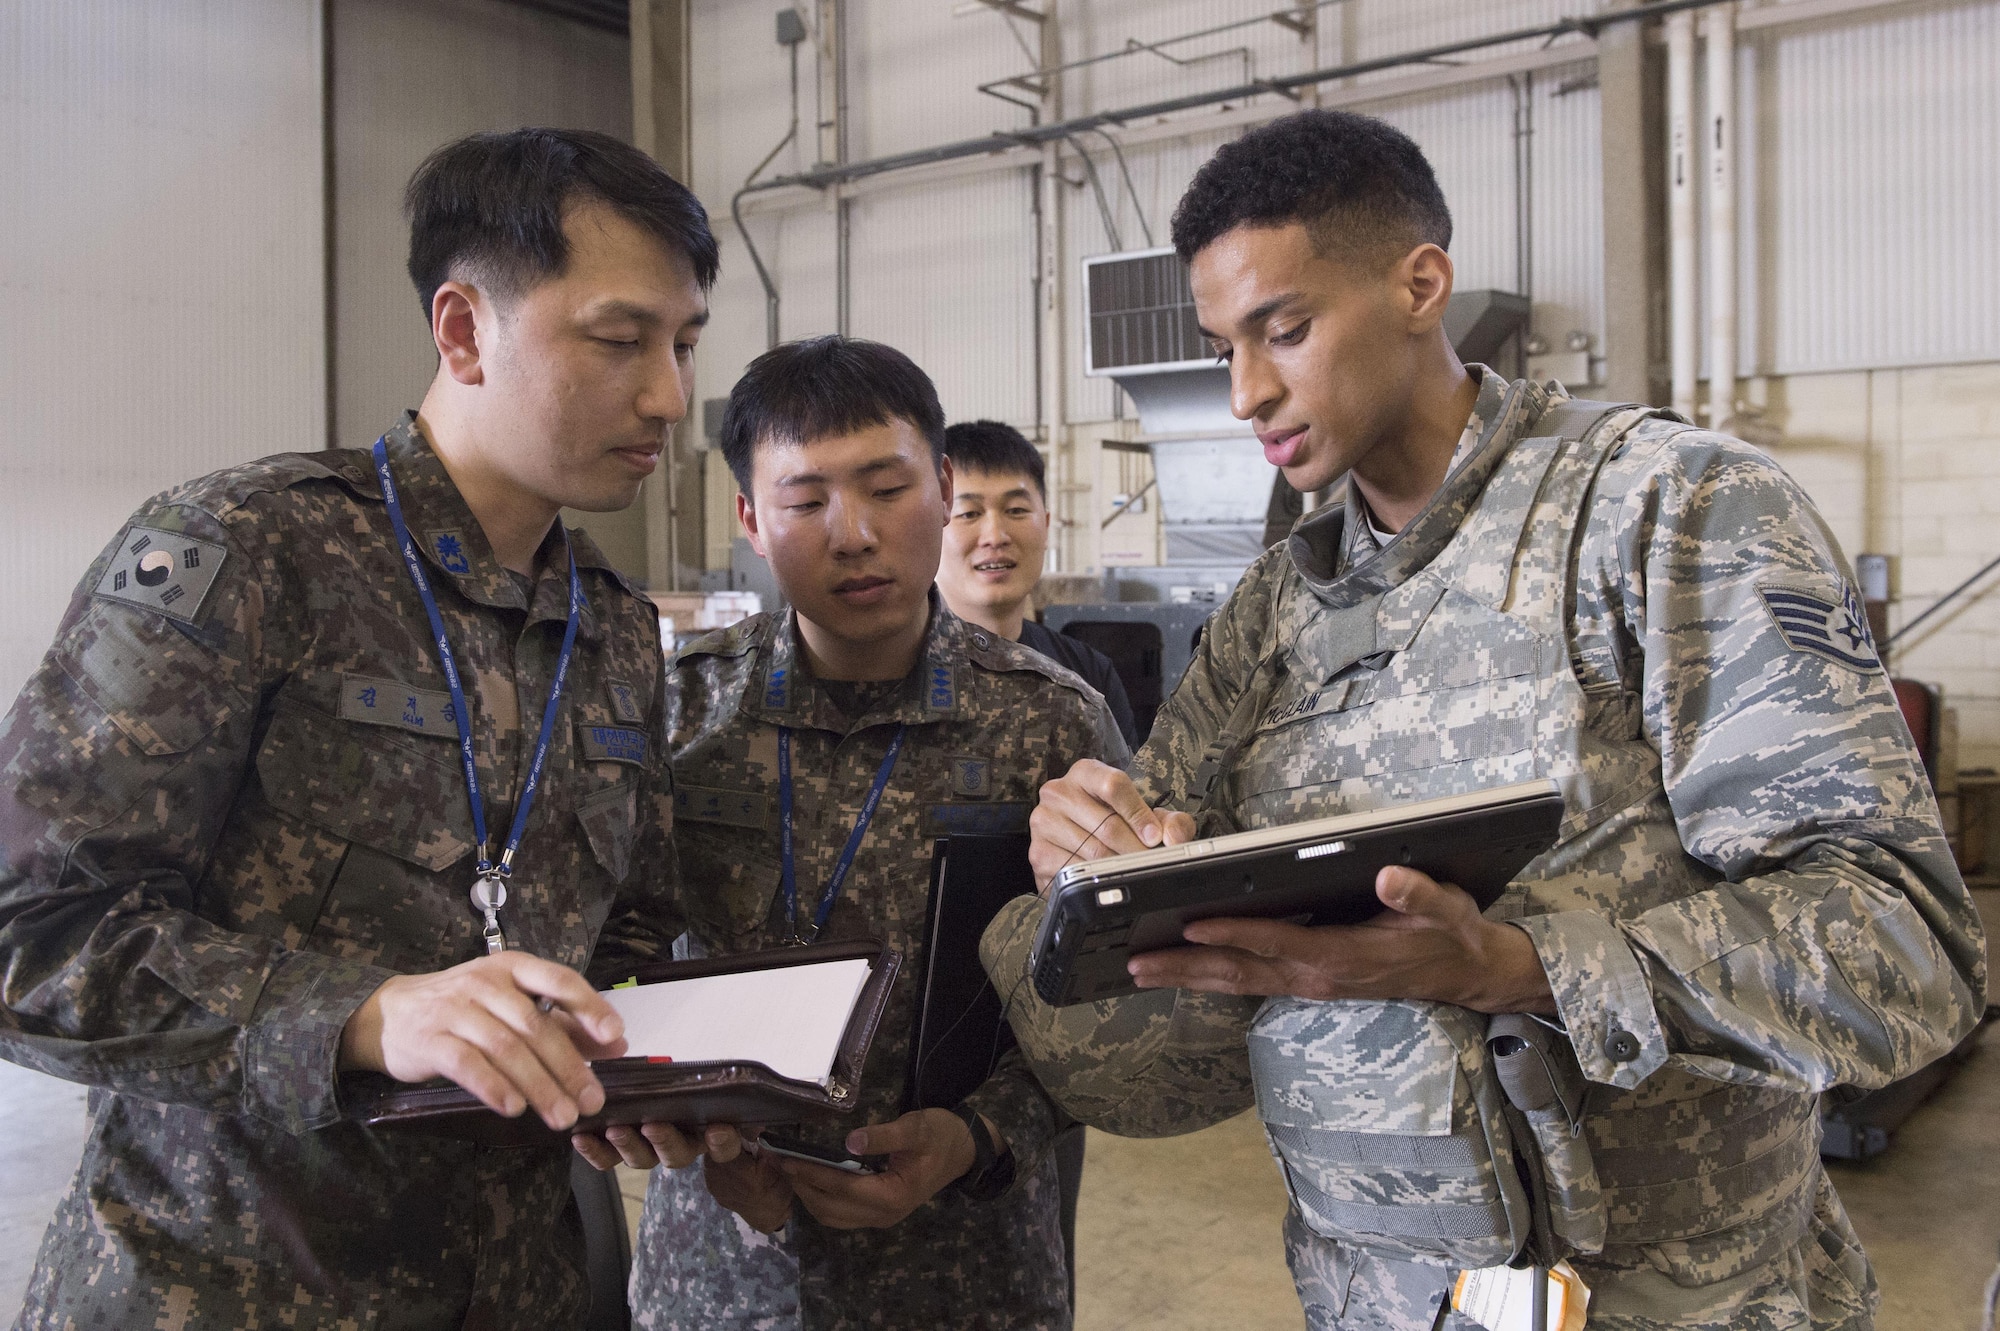 U.S. Air Force Staff Sgt. Robin McClain, a cyber technician assigned to the 621st Contingency Response Wing stationed at Joint Base McGuire-Dix-Lakehurst, N.J., talks about procedures with two Republic of Korea Air Force Airmen during exercise Turbo Distribution 17-3 at Pohang Air Base, Republic of Korea, April 7, 2017. The CRW specializes in rapidly establishing hubs for cargo distribution operations worldwide, to include remote and austere locations, on short notice. (U.S. Air Force photo by Tech. Sgt. Gustavo Gonzalez/RELEASED)